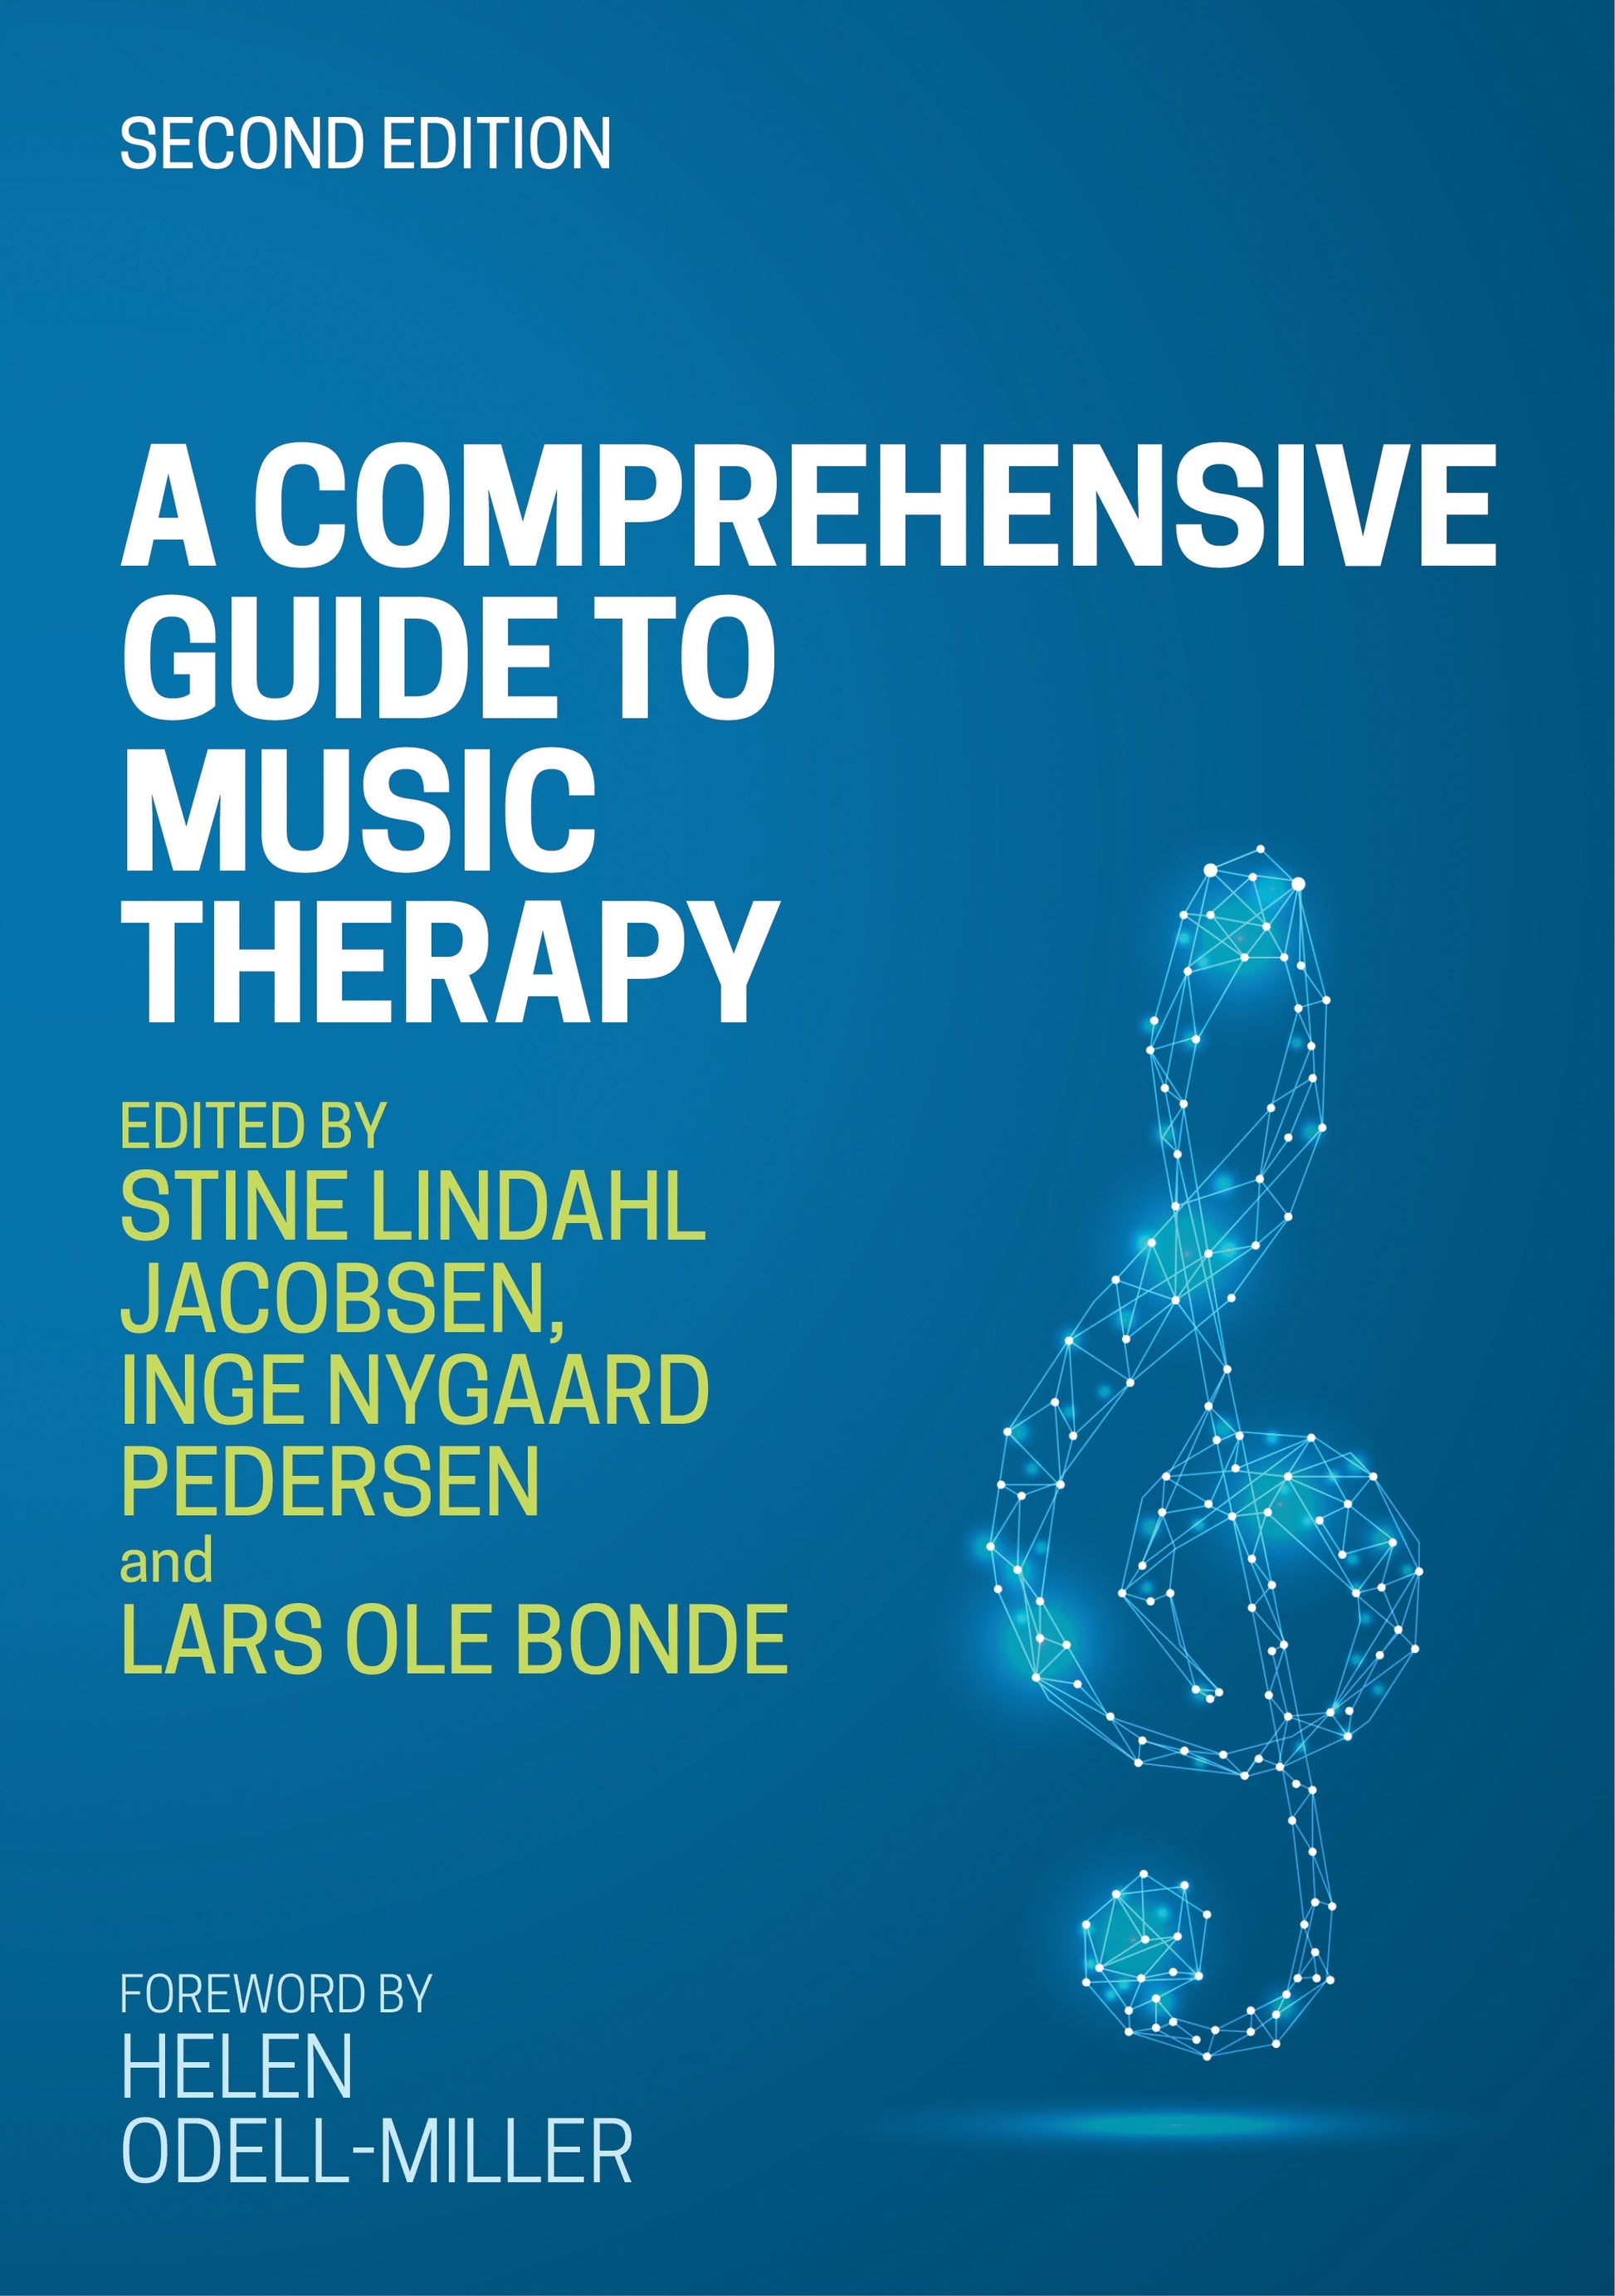 A Comprehensive Guide to Music Therapy, 2nd Edition by No Author Listed, Helen Odell-Miller, Inge Nygaard Pedersen, Lars Ole Bonde, Stine Lindahl Jacobsen